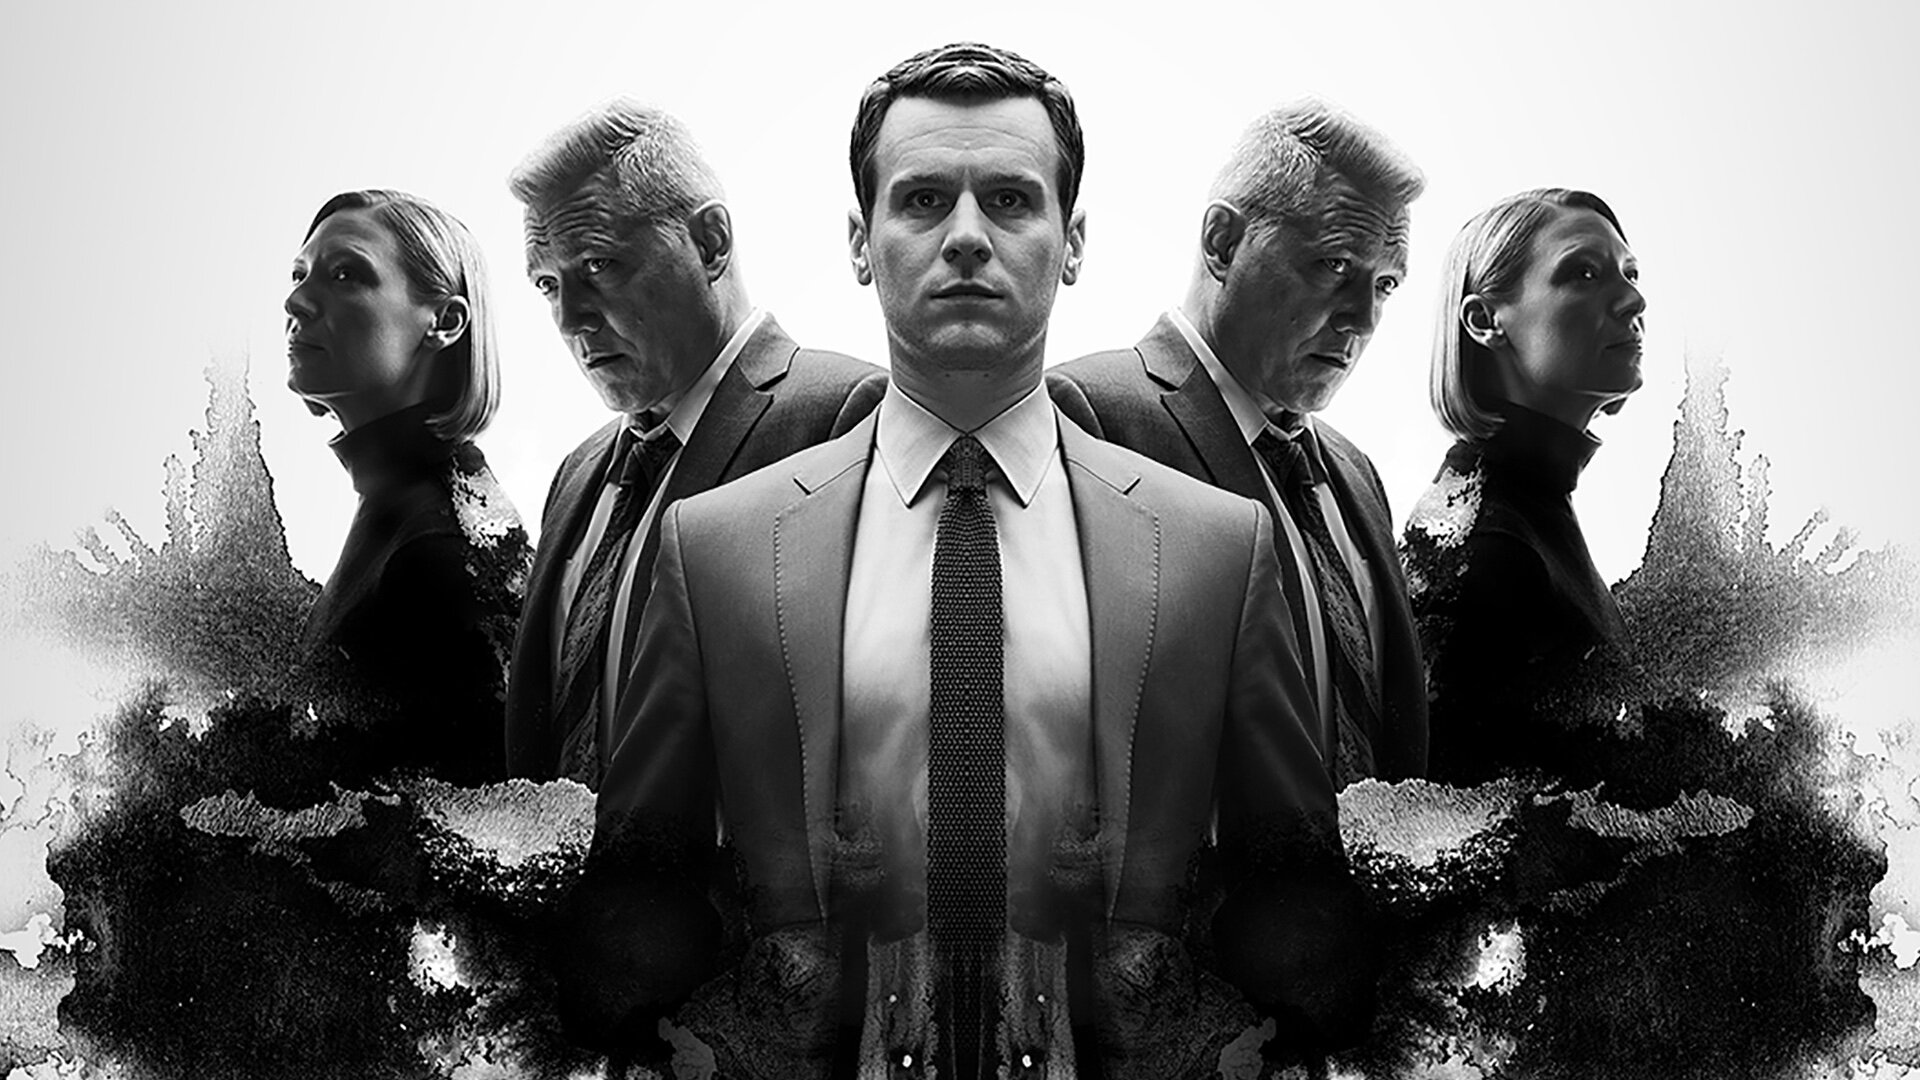 Mindhunter Wallpapers